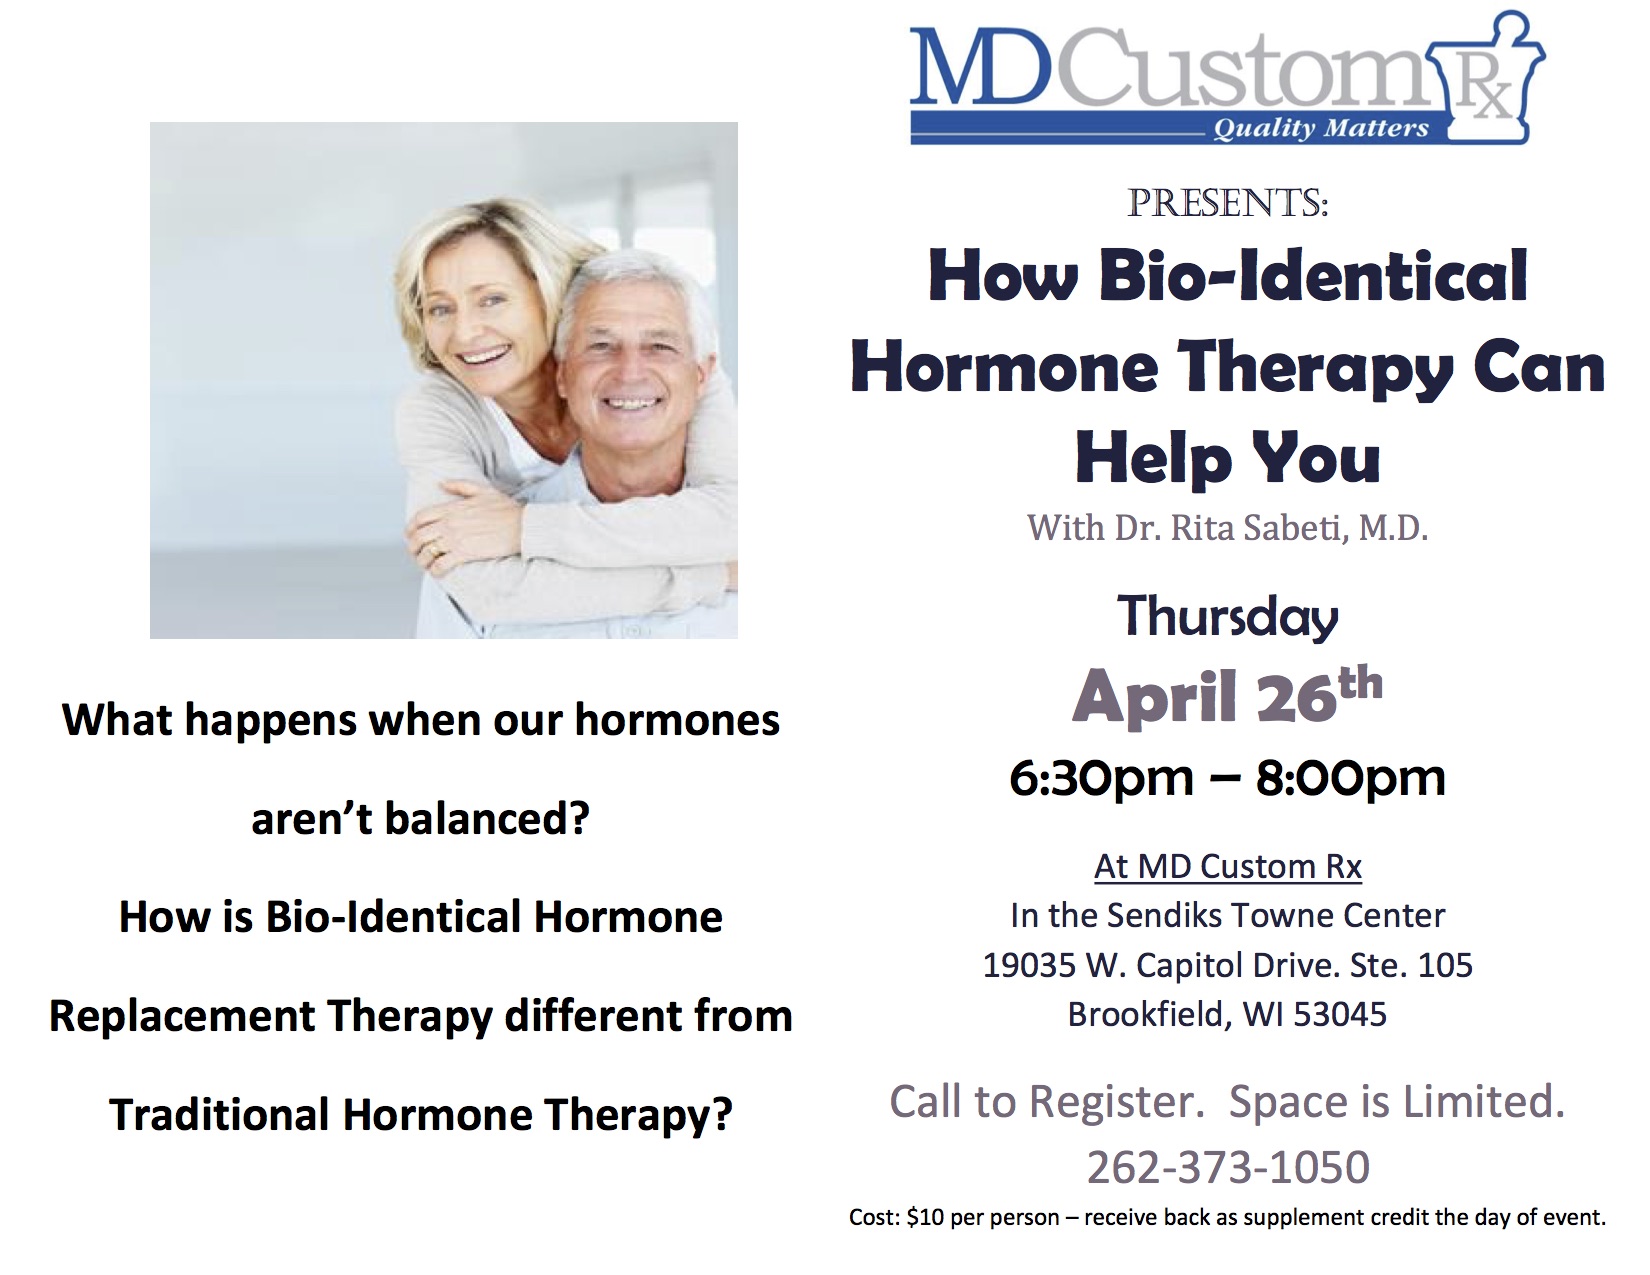 How Bio-Identical Hormone Therapy Can Help You 